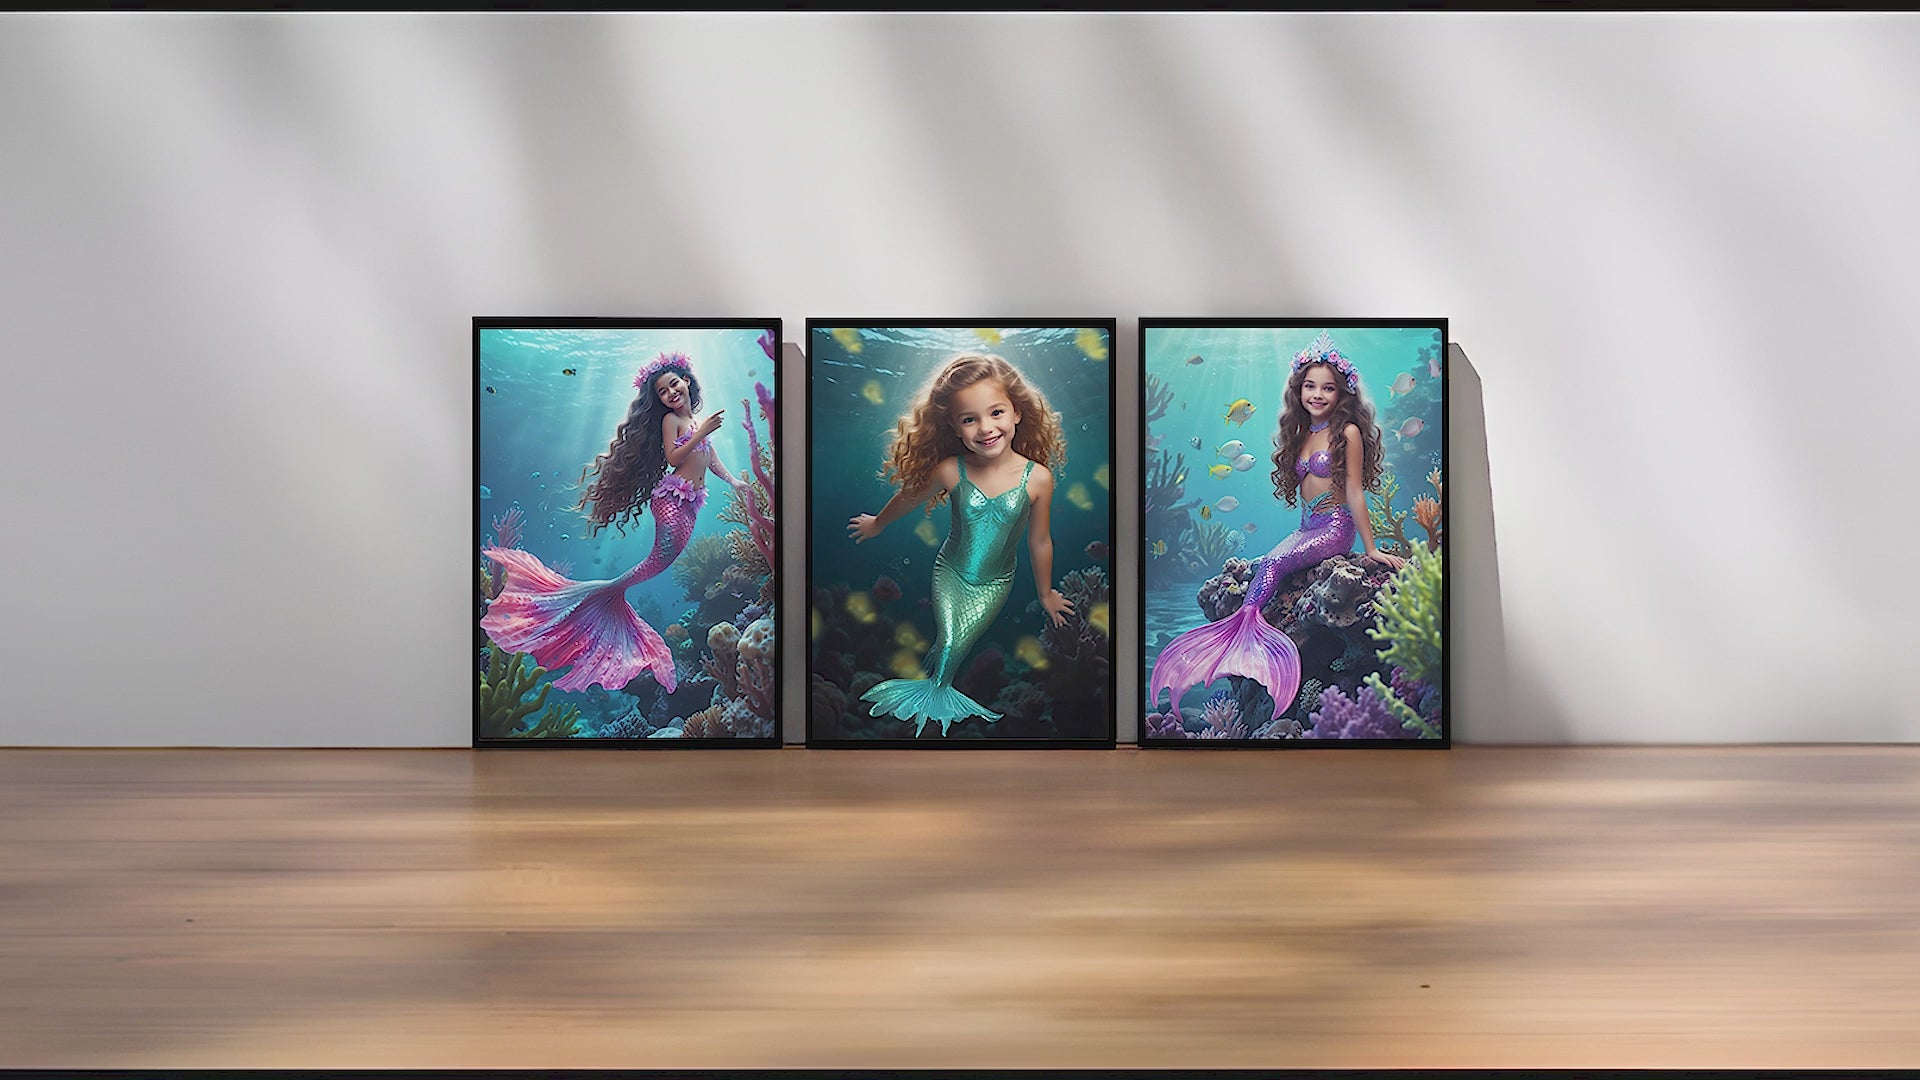 Create a stunning Custom Mermaid Portrait from Photo. Personalized Princess Mermaid Portrait for your daughter's Birthday. Transform any photo into Wall Art. Custom Mermaid Gifts for girls. Unique Princess Birthday Gift. Personalized Photo Portrait to cherish forever. Ideal for sister, mom, or girlfriend.